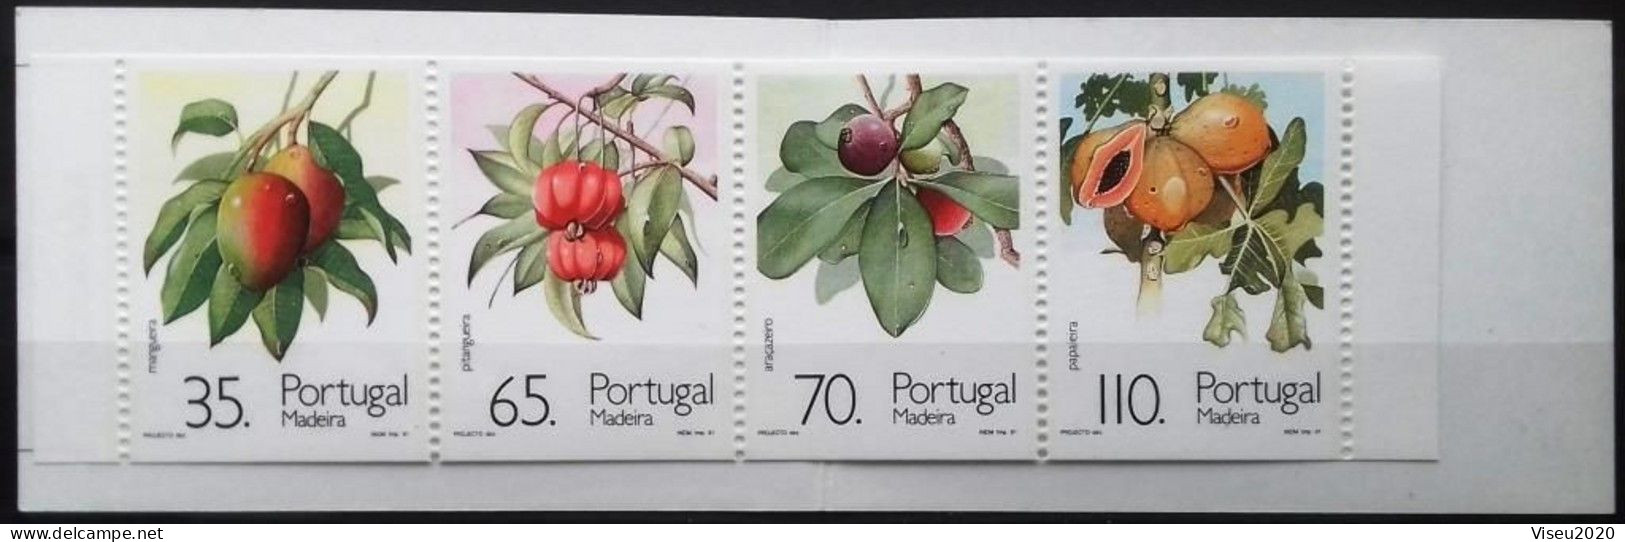 Portugal Booklet  Afinsa 79 -MADEIRA 1991 Fruits And Plants Of Subtropic Region MNH - Carnets